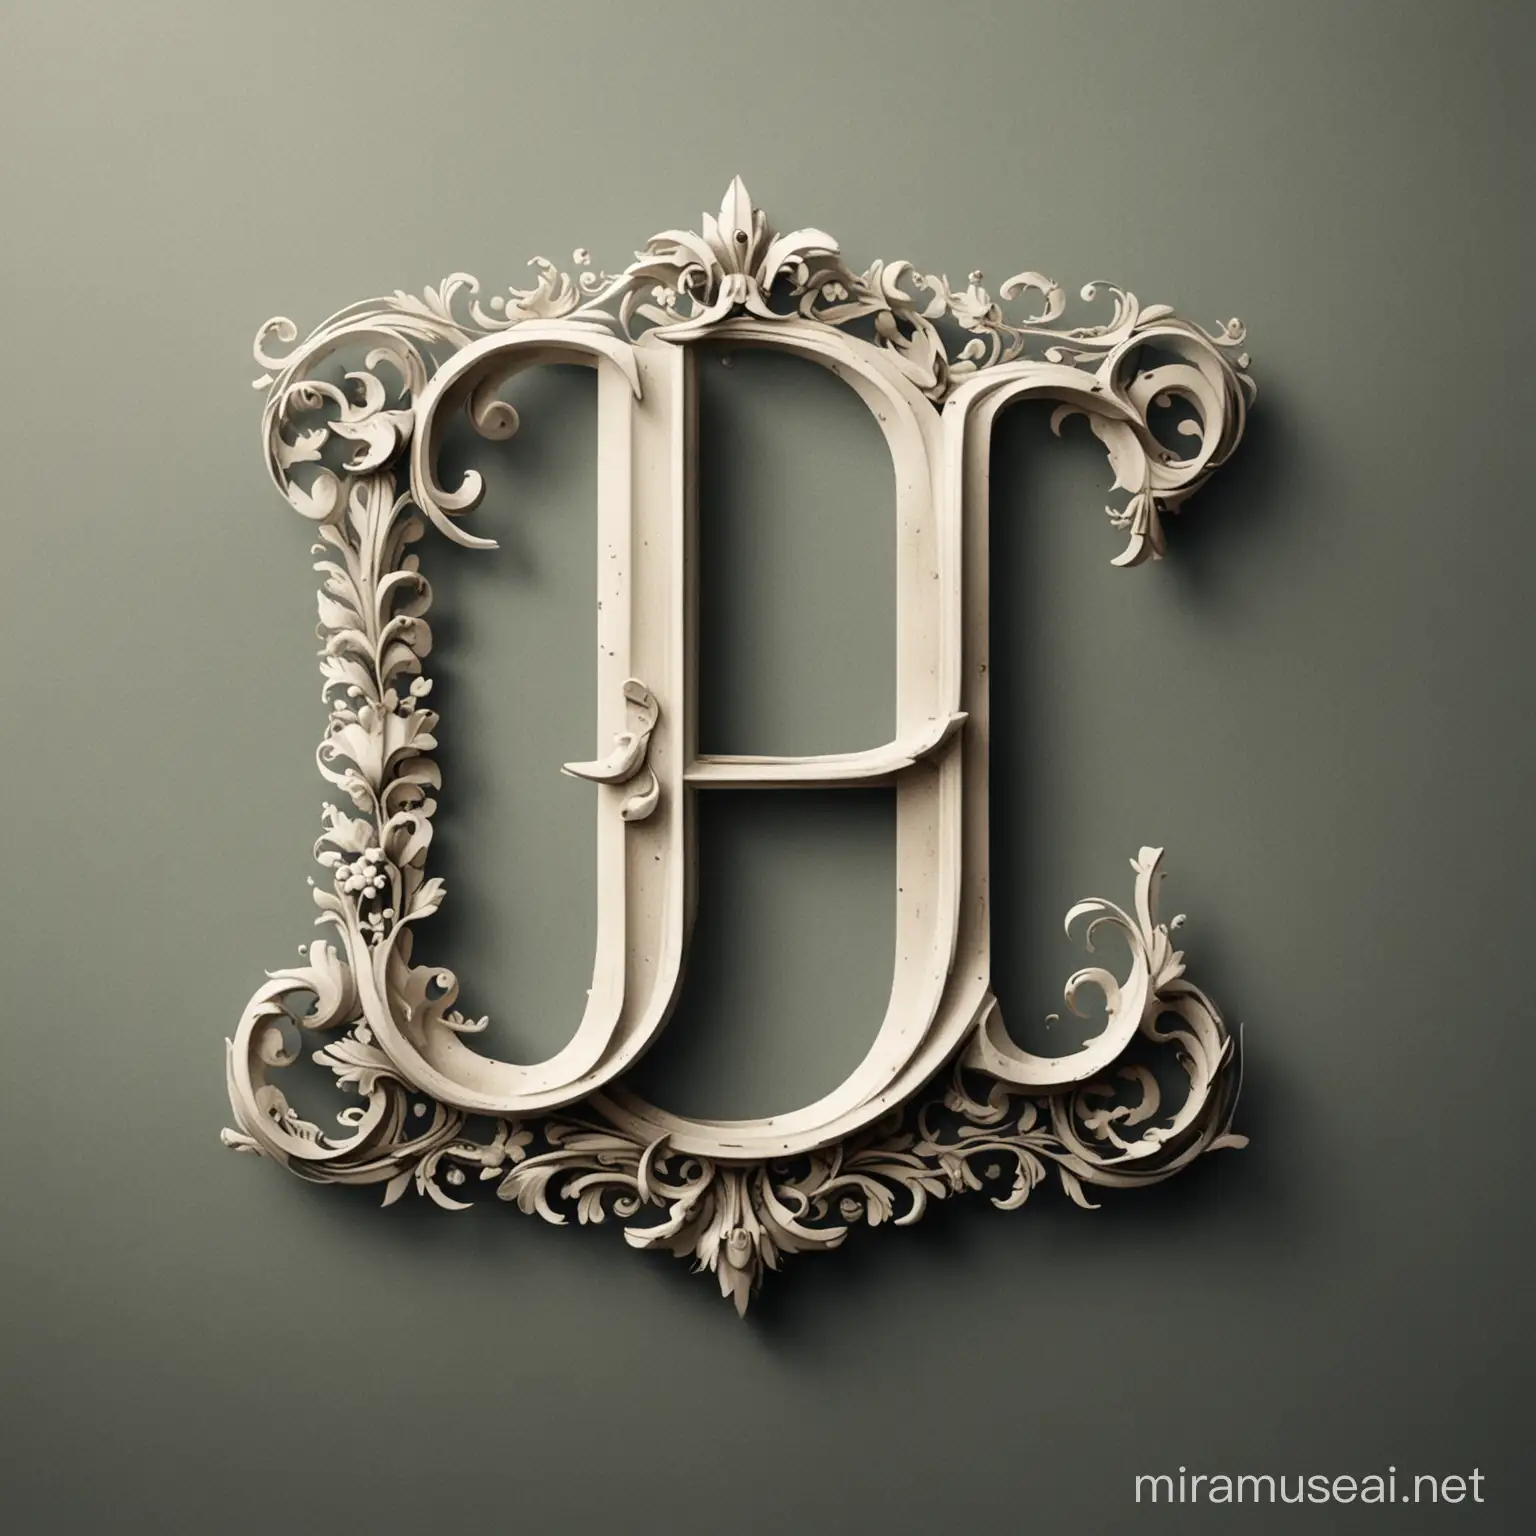 a monogram made of letters J and E